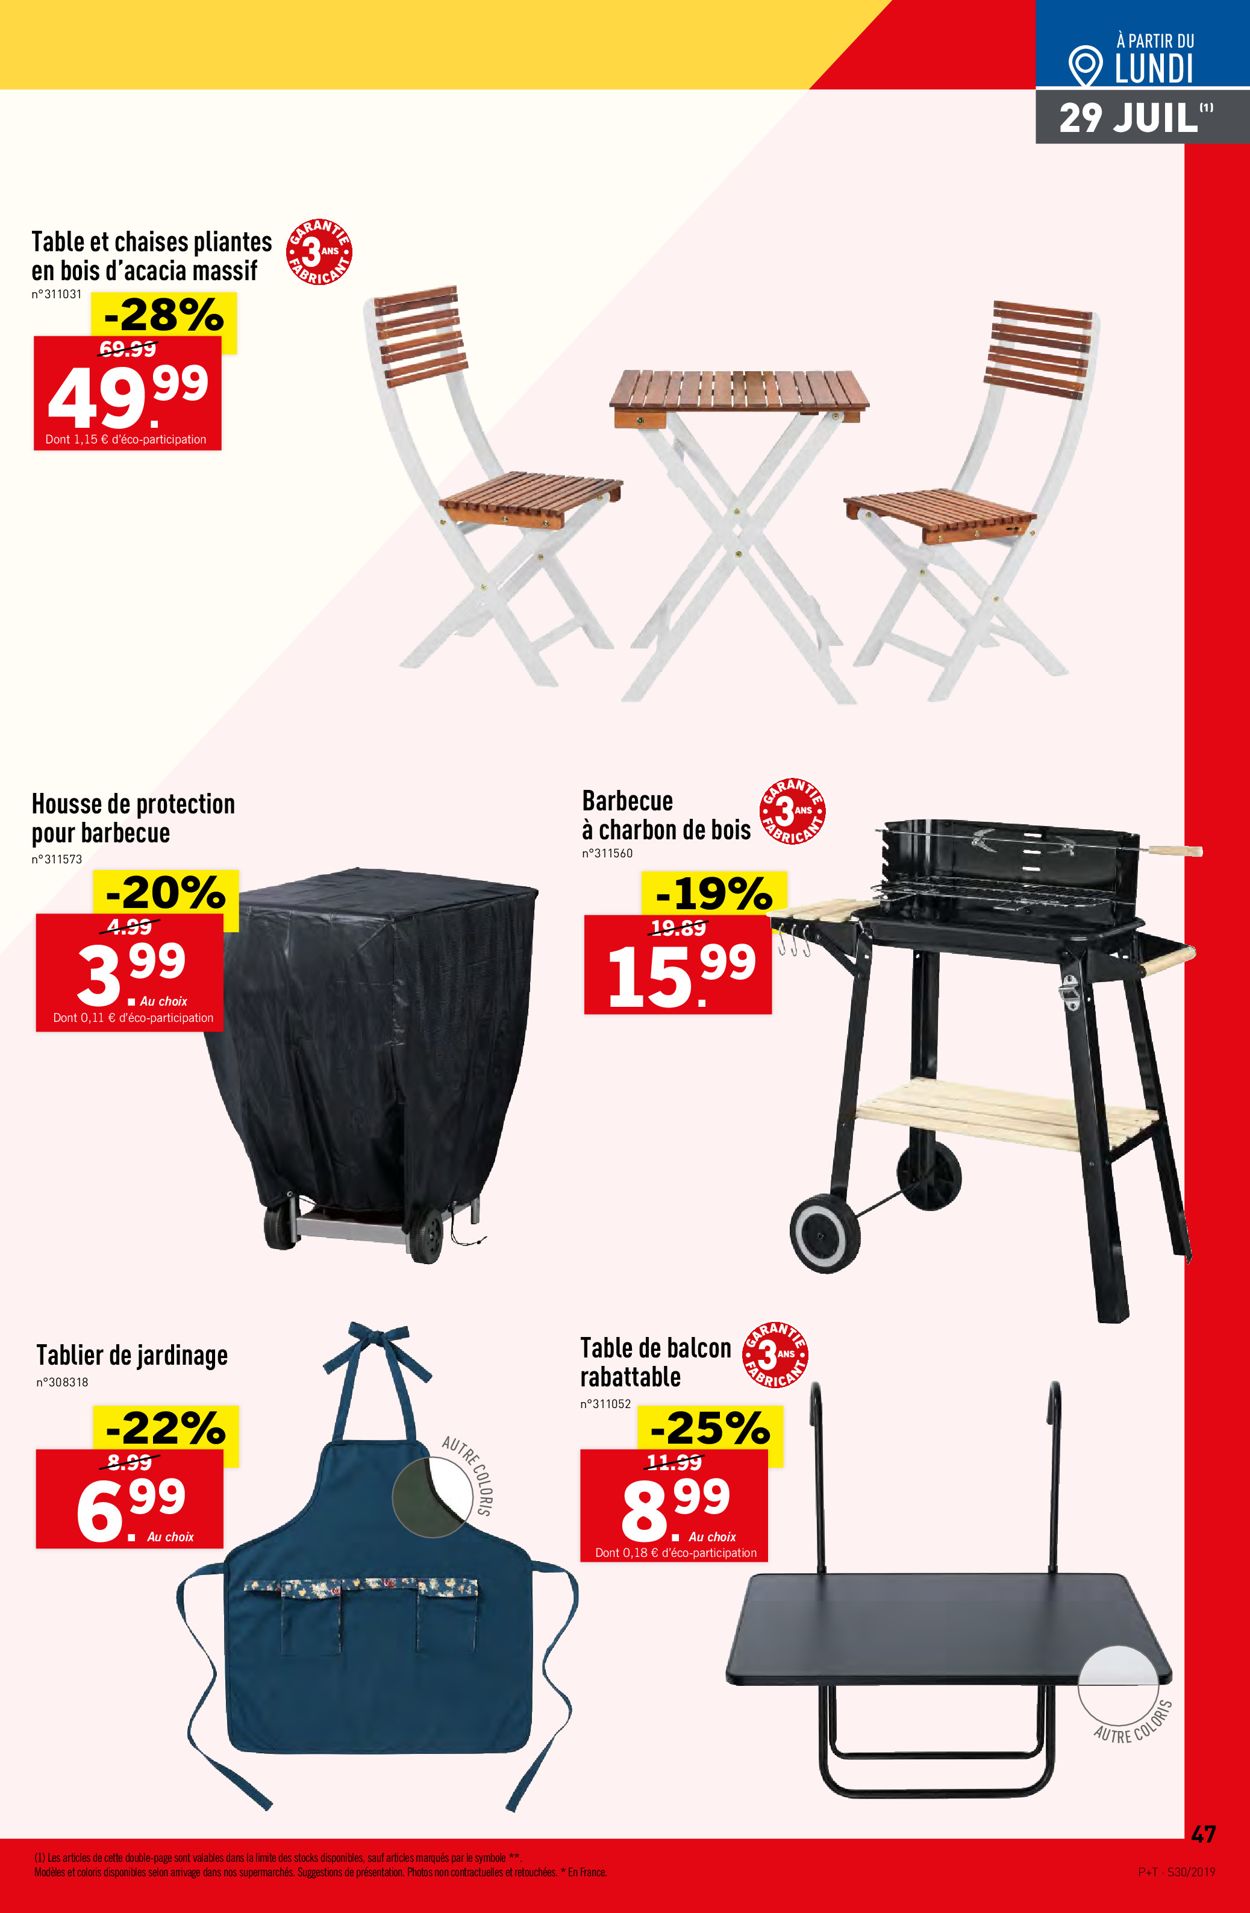 Lidl Catalogue - 24.07-30.07.2019 (Page 47)